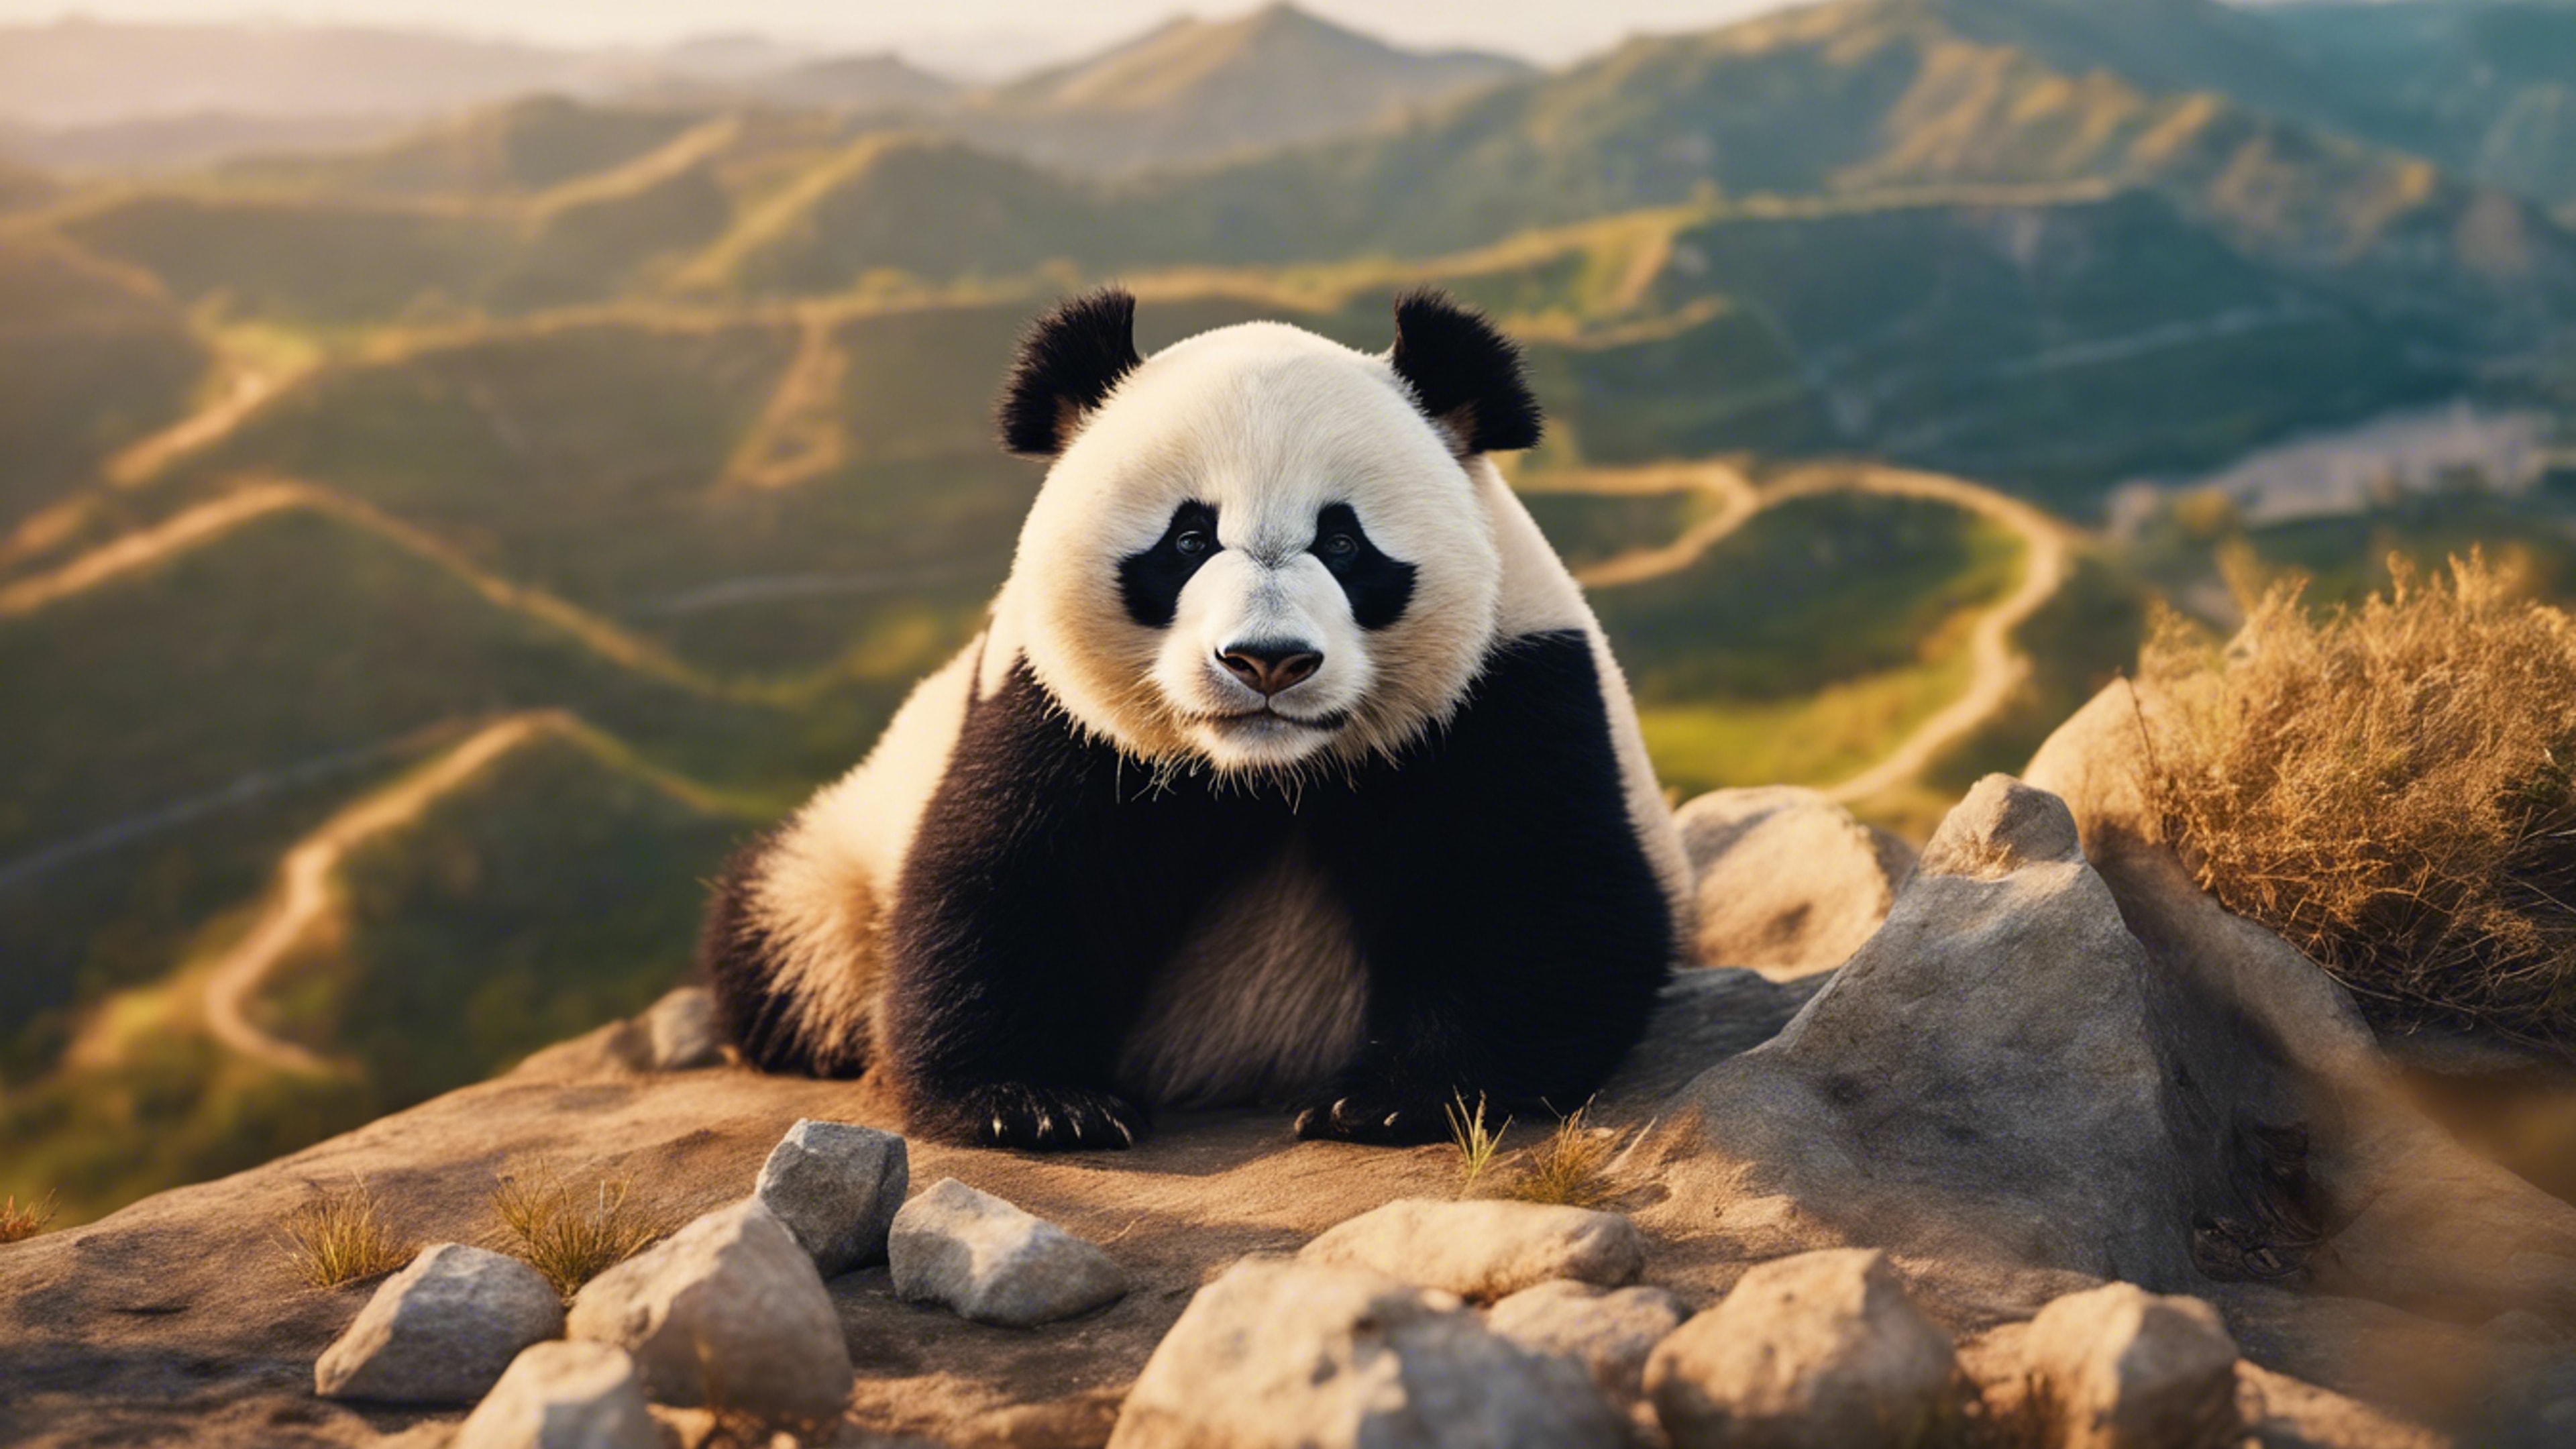 A proud panda basking in the warm sunlight, on a cliff overlooking a wide, beautiful valley. ផ្ទាំង​រូបភាព[f1b4c4cbced14ad39a34]